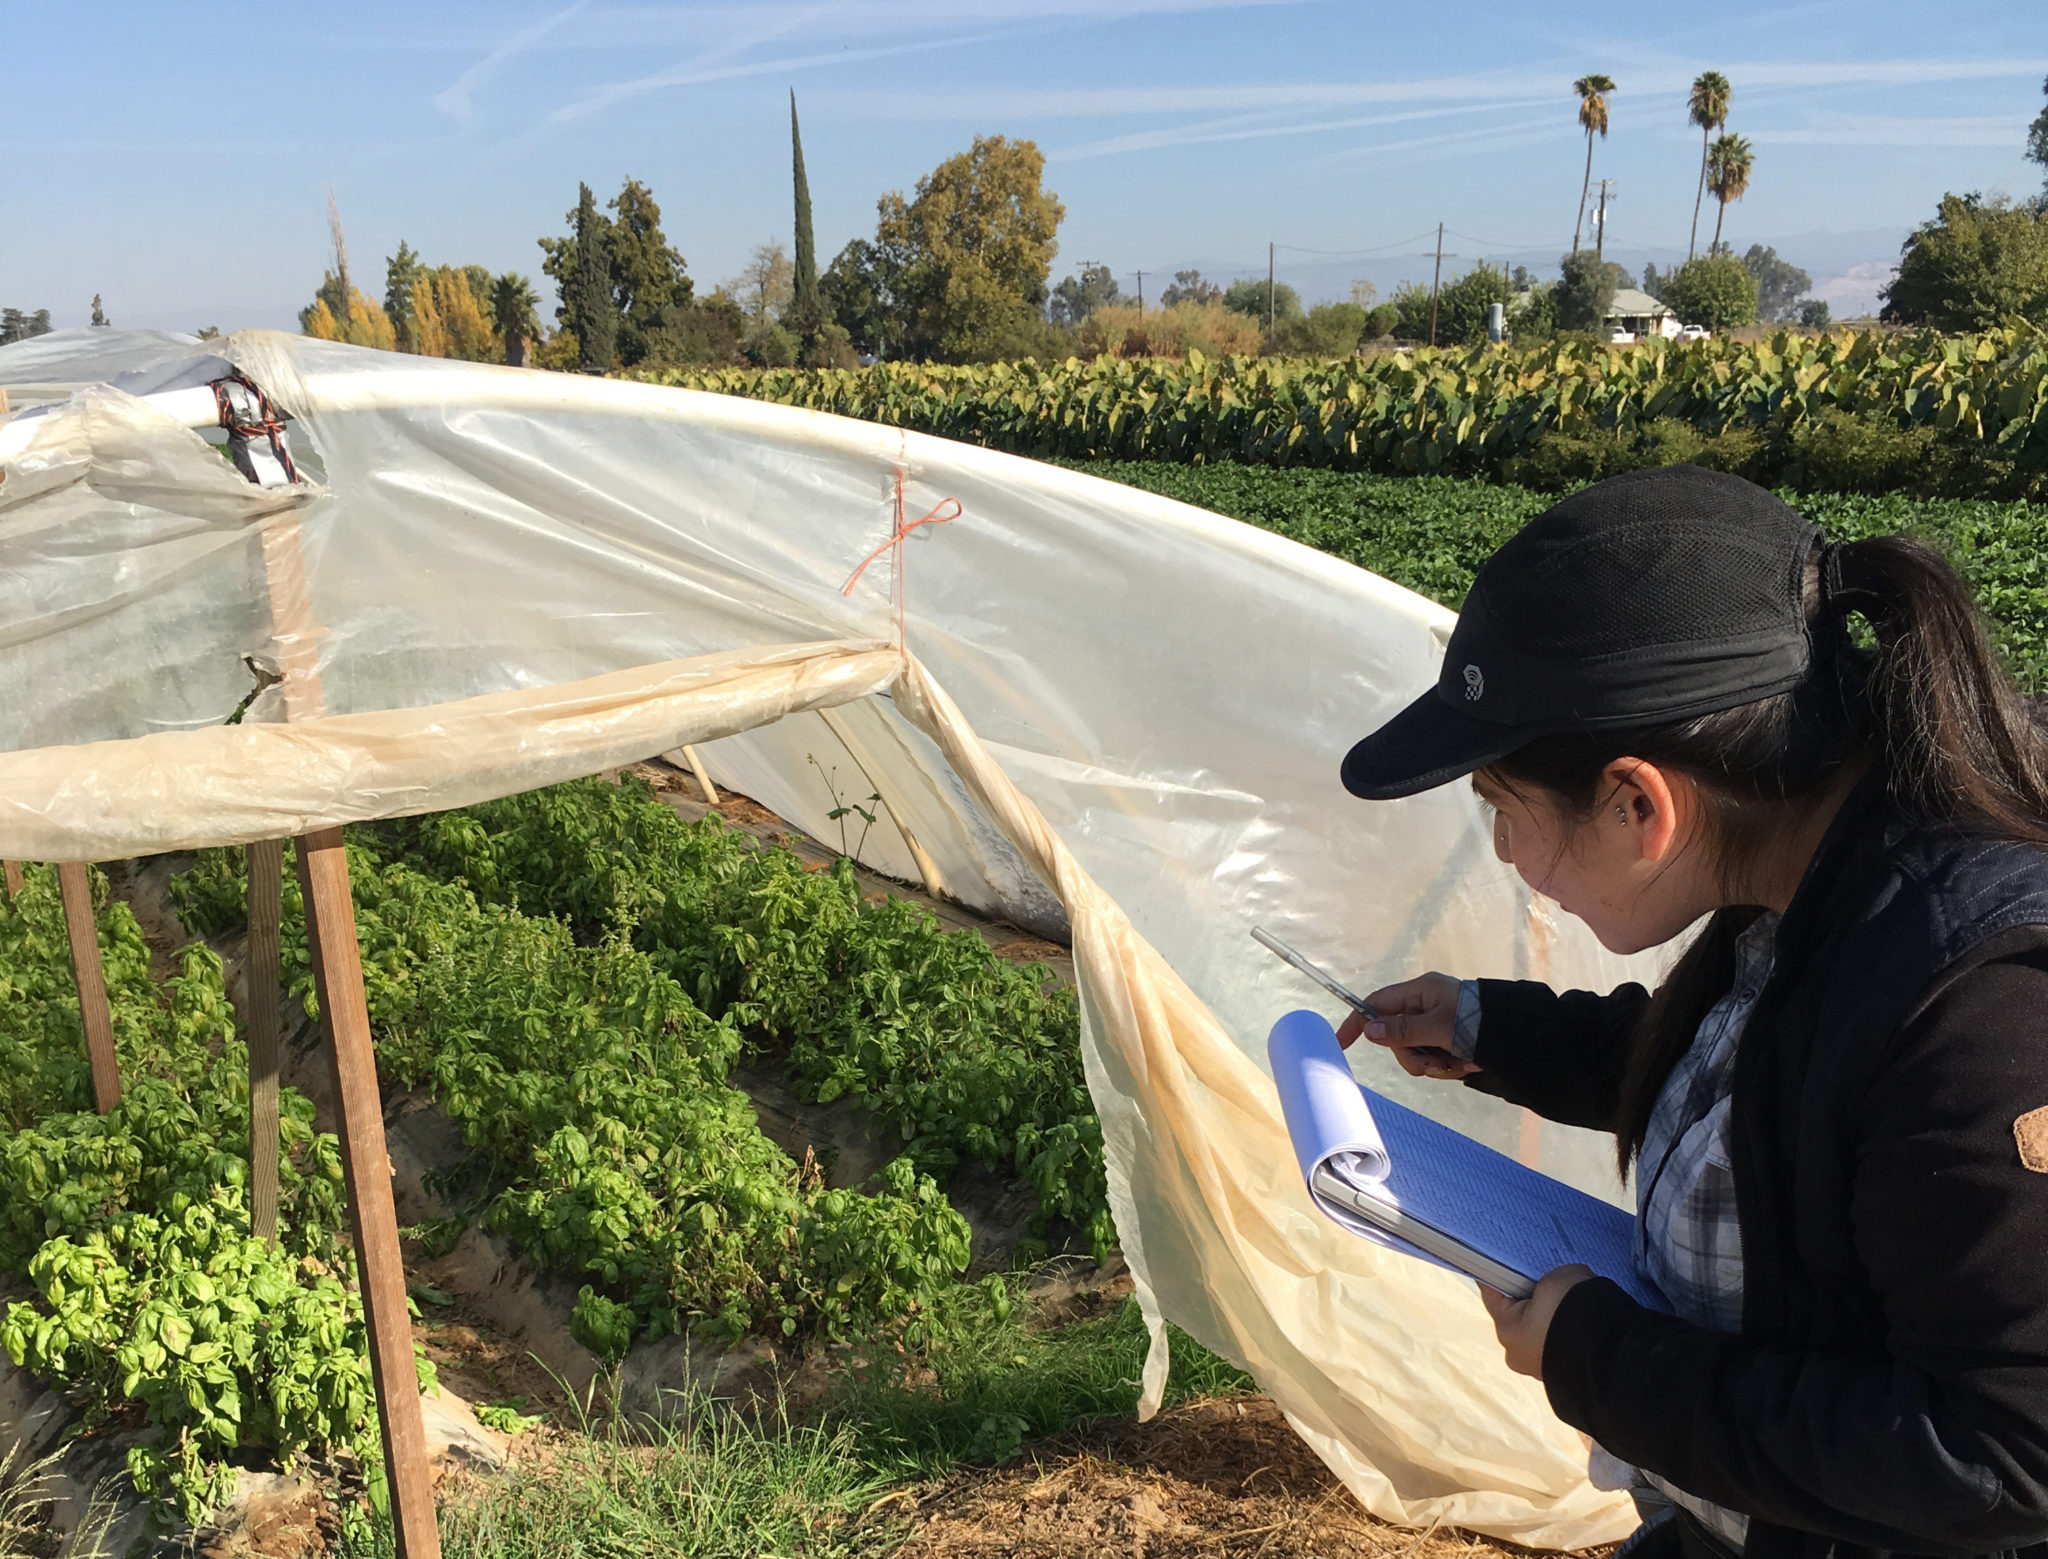 Environmental Science, Policy, and Management PhD Candidate Aidee Guzman conducting a crop diversity survey at a farm in Fresno County. Photo by: Rodolfo Huerta.